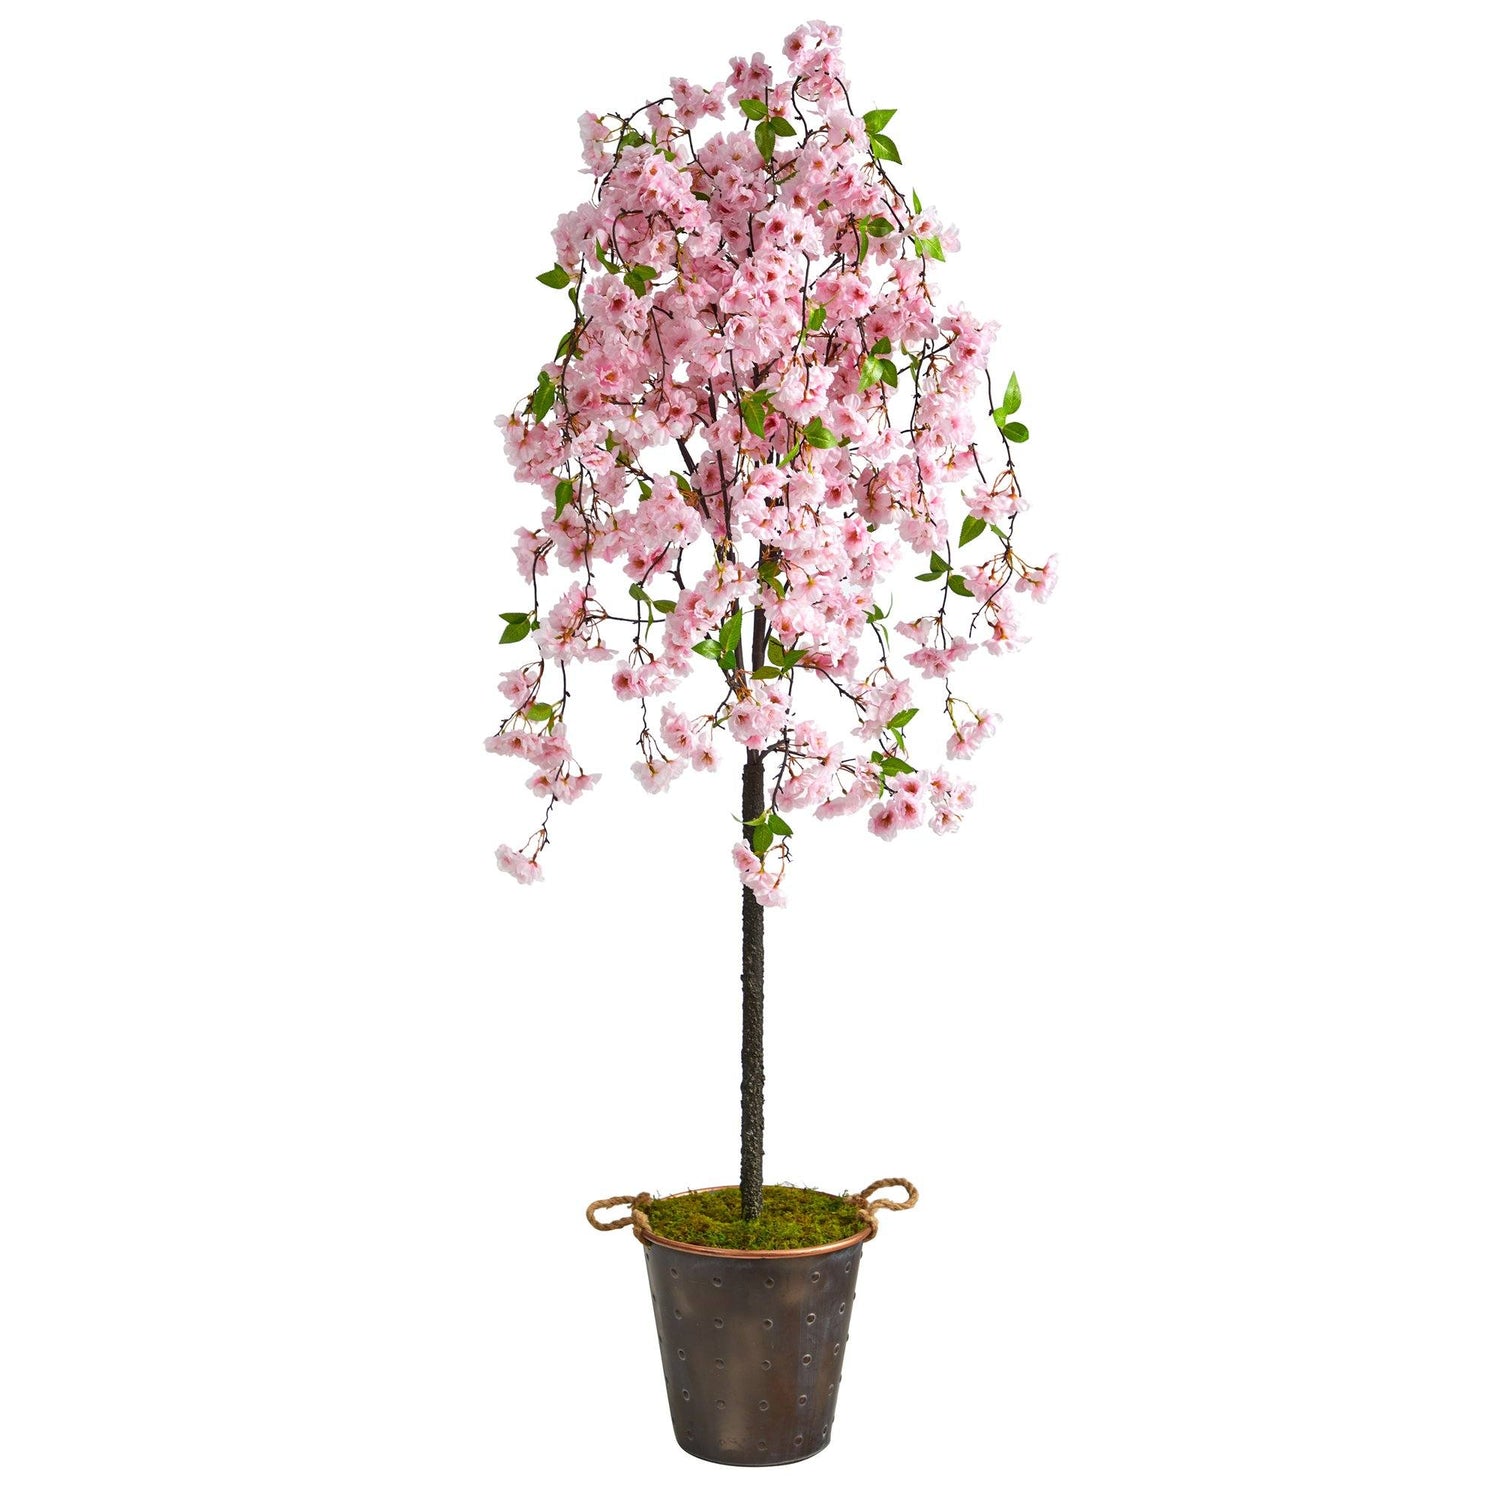 6' Artificial Cherry Blossom Tree in Decorative Metal Pail with Rope